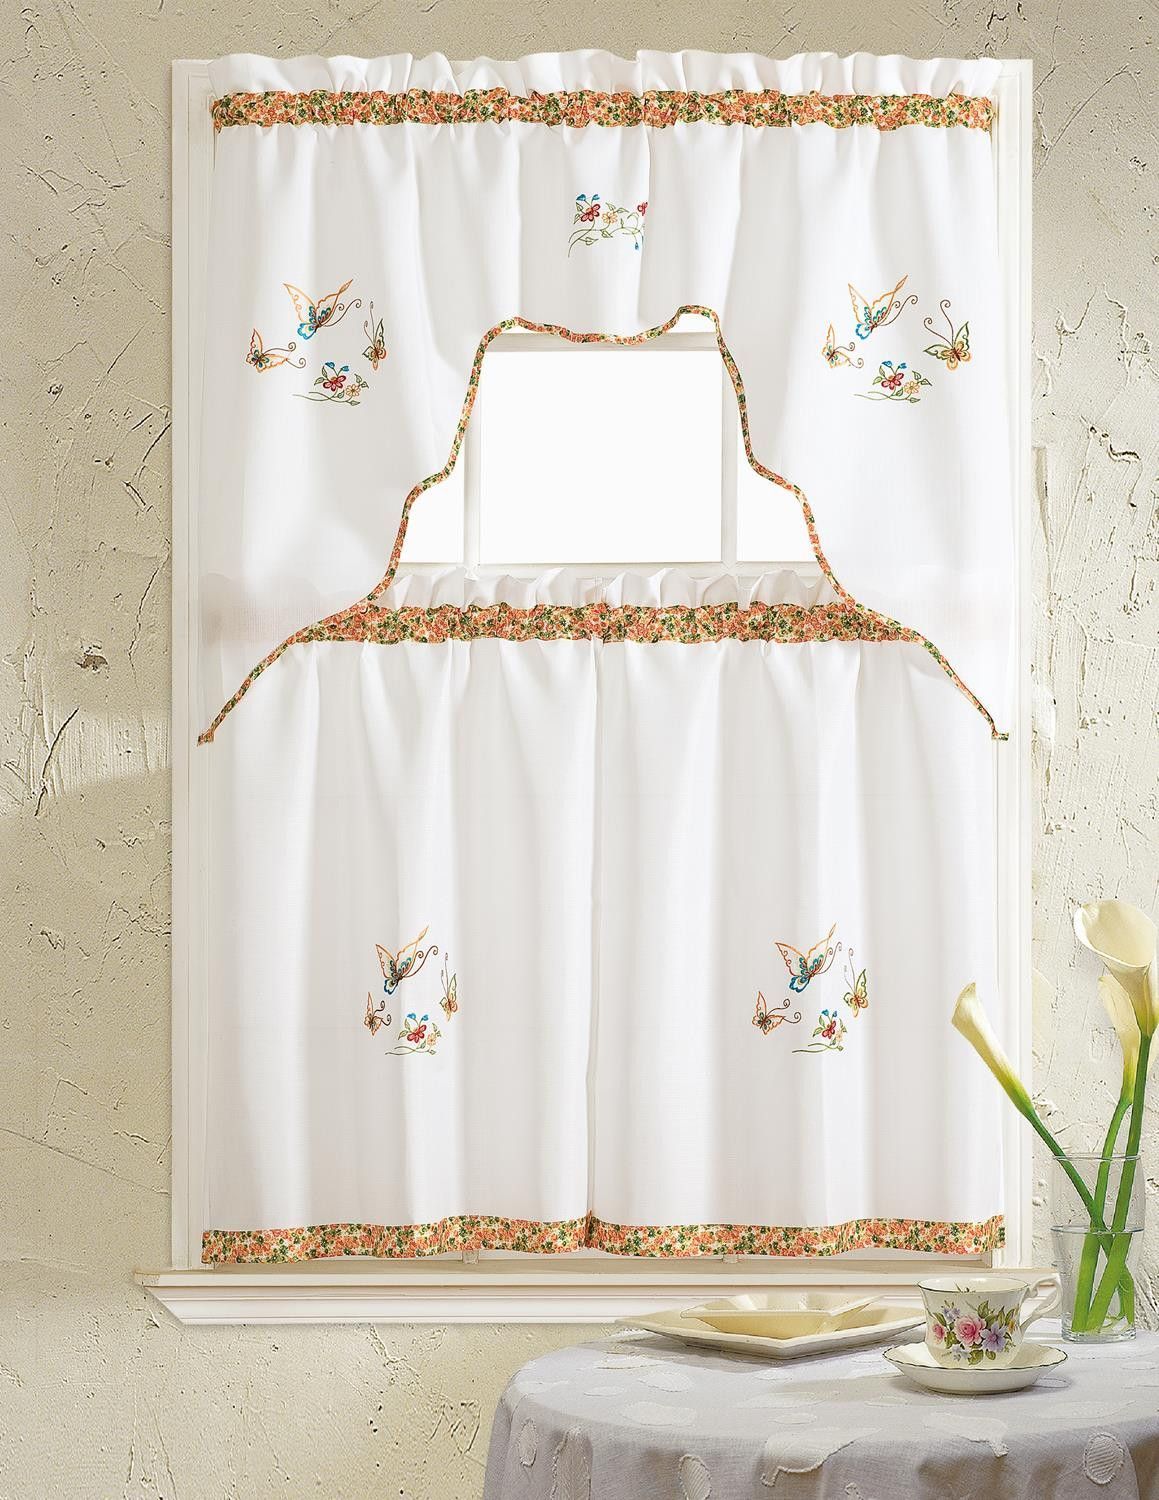 Grand Butterfly Embroidered Ruffle Kitchen Curtain Set For Urban Embroidered Tier And Valance Kitchen Curtain Tier Sets (View 11 of 20)